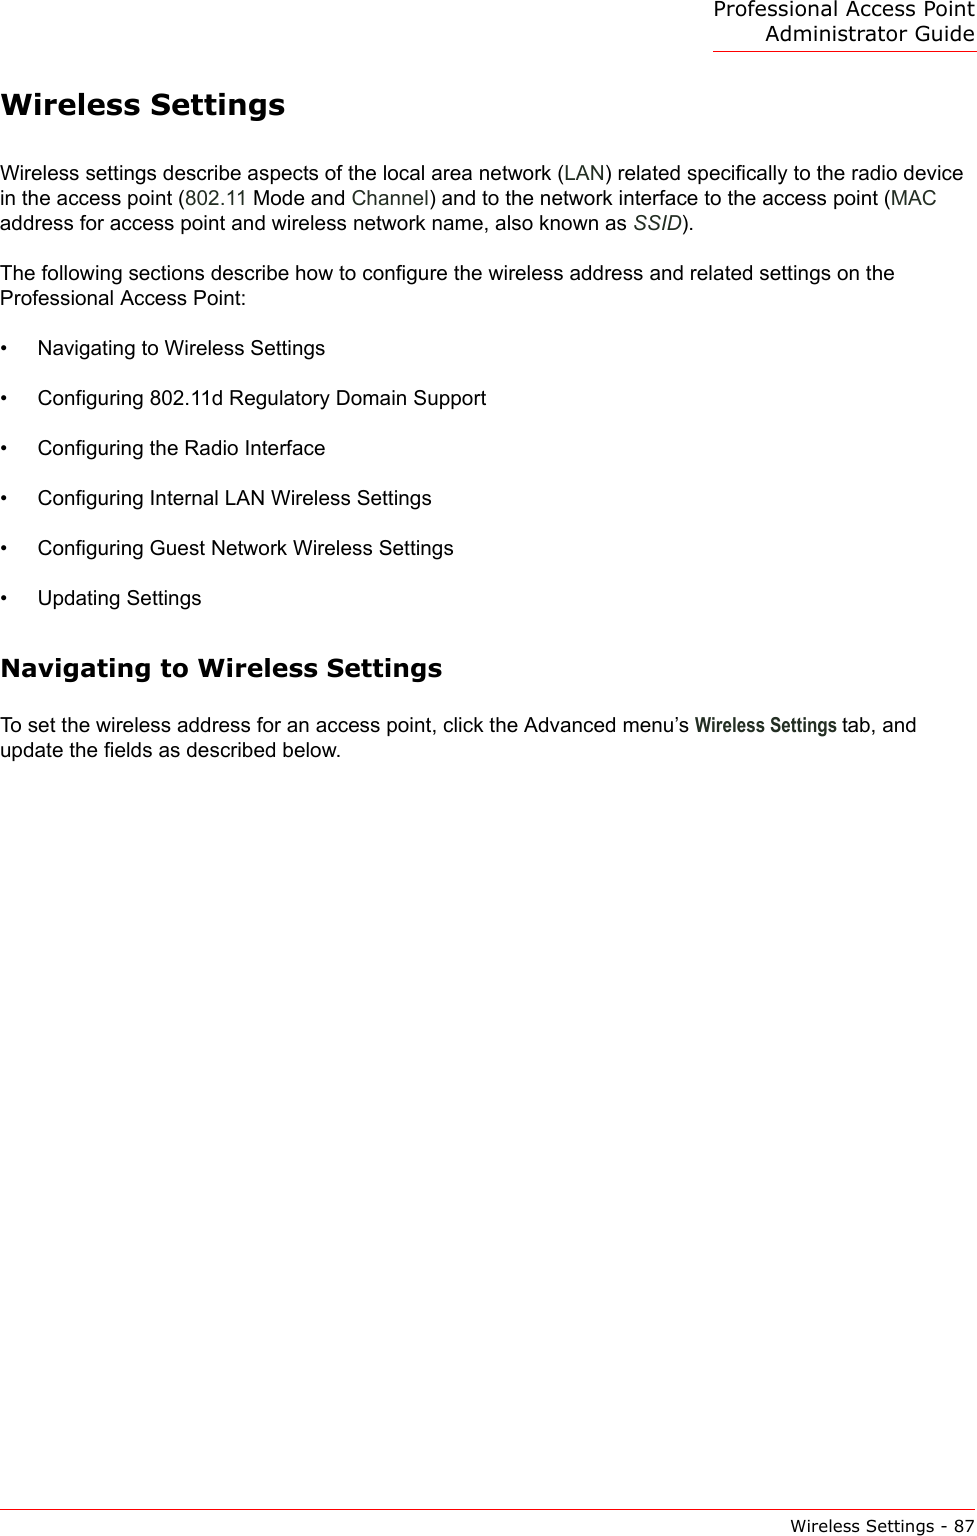 Professional Access Point Administrator GuideWireless Settings - 87Wireless SettingsWireless settings describe aspects of the local area network (LAN) related specifically to the radio device in the access point (802.11 Mode and Channel) and to the network interface to the access point (MAC address for access point and wireless network name, also known as SSID).The following sections describe how to configure the wireless address and related settings on the Professional Access Point:•Navigating to Wireless Settings•Configuring 802.11d Regulatory Domain Support•Configuring the Radio Interface•Configuring Internal LAN Wireless Settings•Configuring Guest Network Wireless Settings•Updating SettingsNavigating to Wireless SettingsTo set the wireless address for an access point, click the Advanced menu’s Wireless Settings tab, and update the fields as described below.